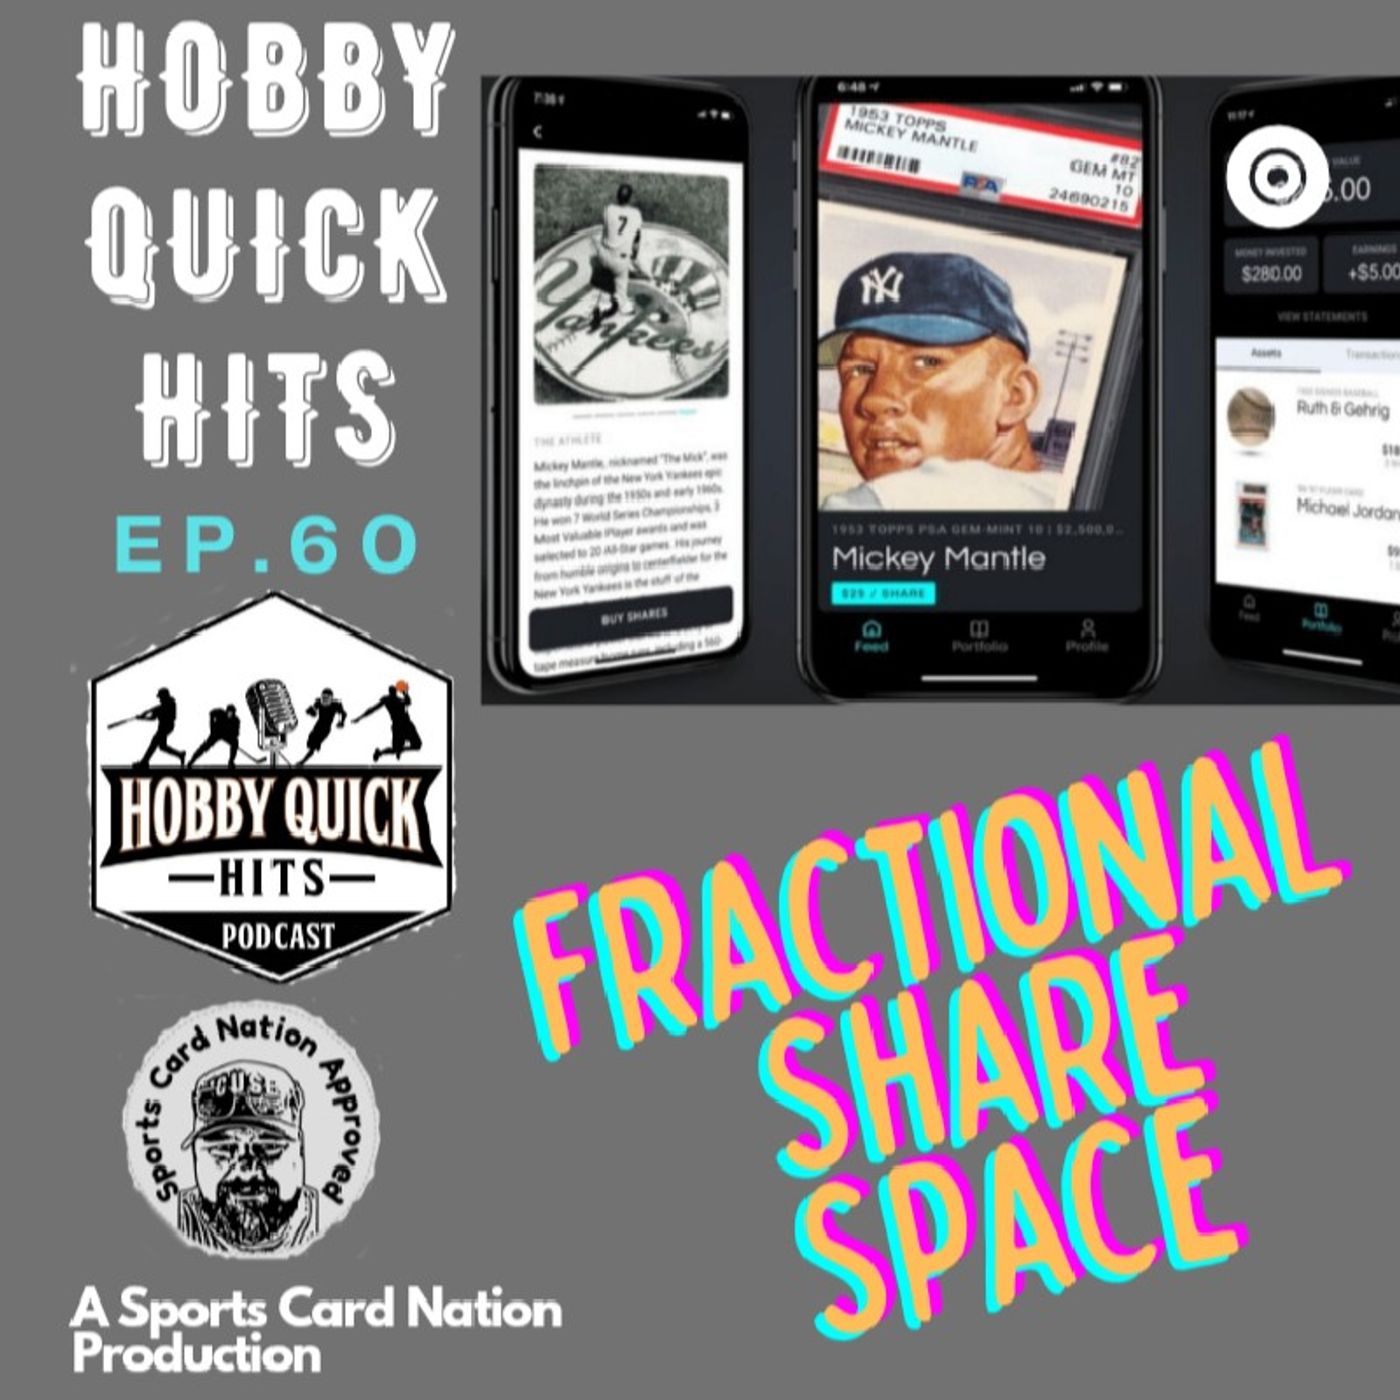 HQH Ep.60 Fractional Share Space